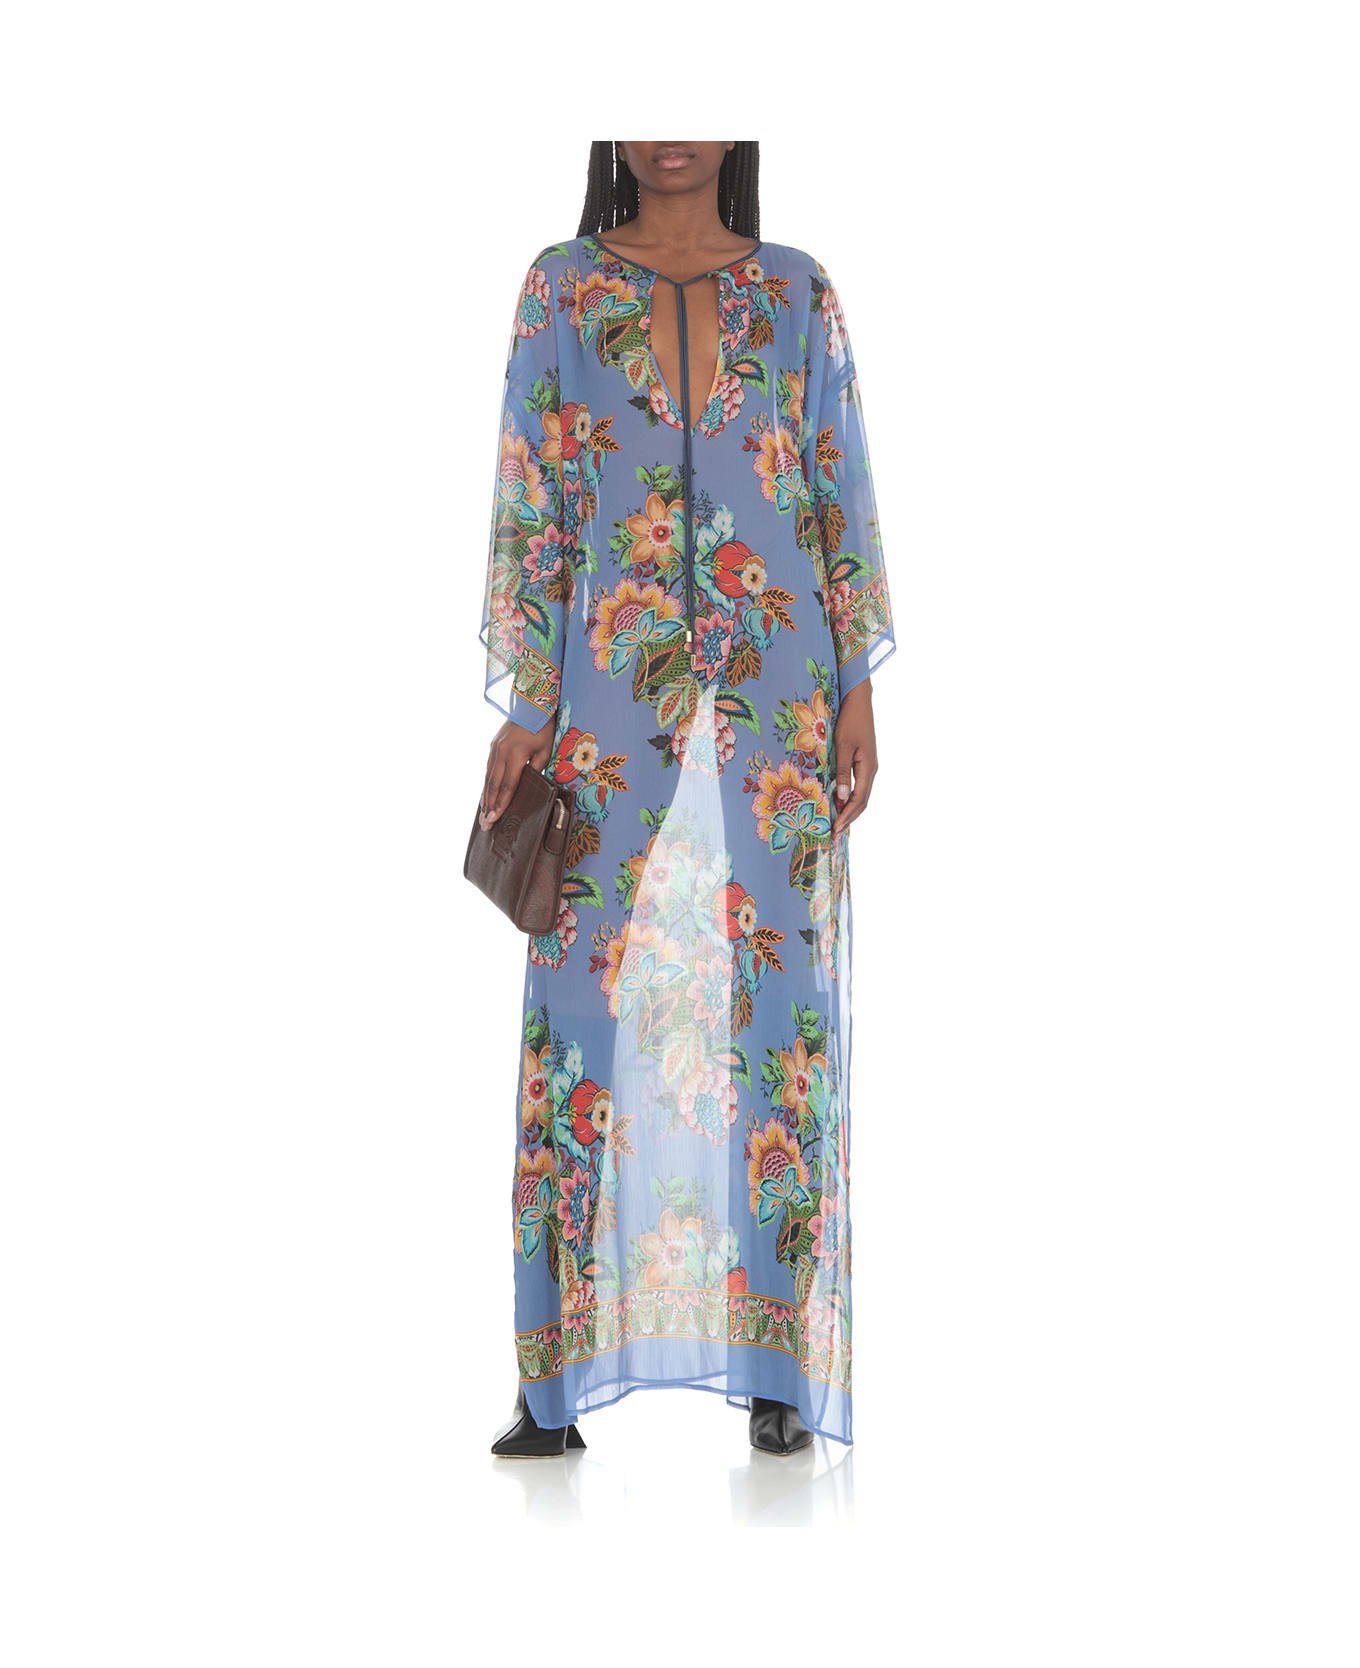 Etro Dress With Floral Pattern - Light Blue